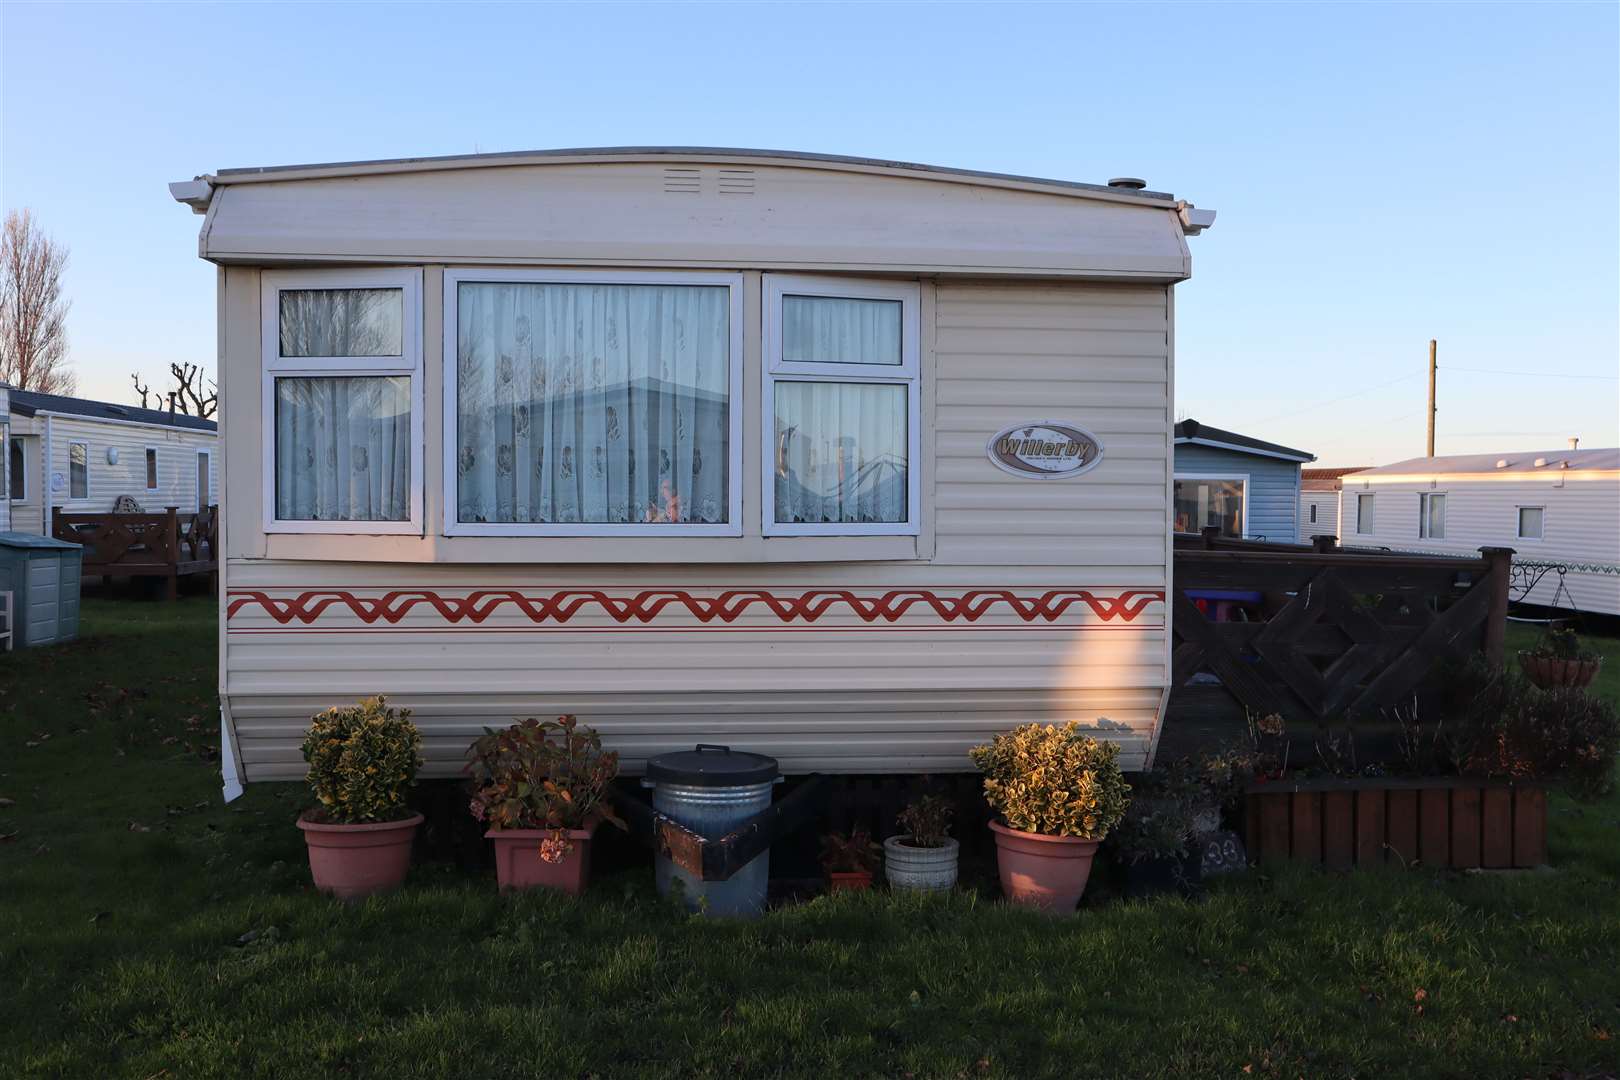 Caravan 133 where ex-Liverpool and England footballer and TV pundit Jamie Redknapp stayed as a boy with his nan and grandad